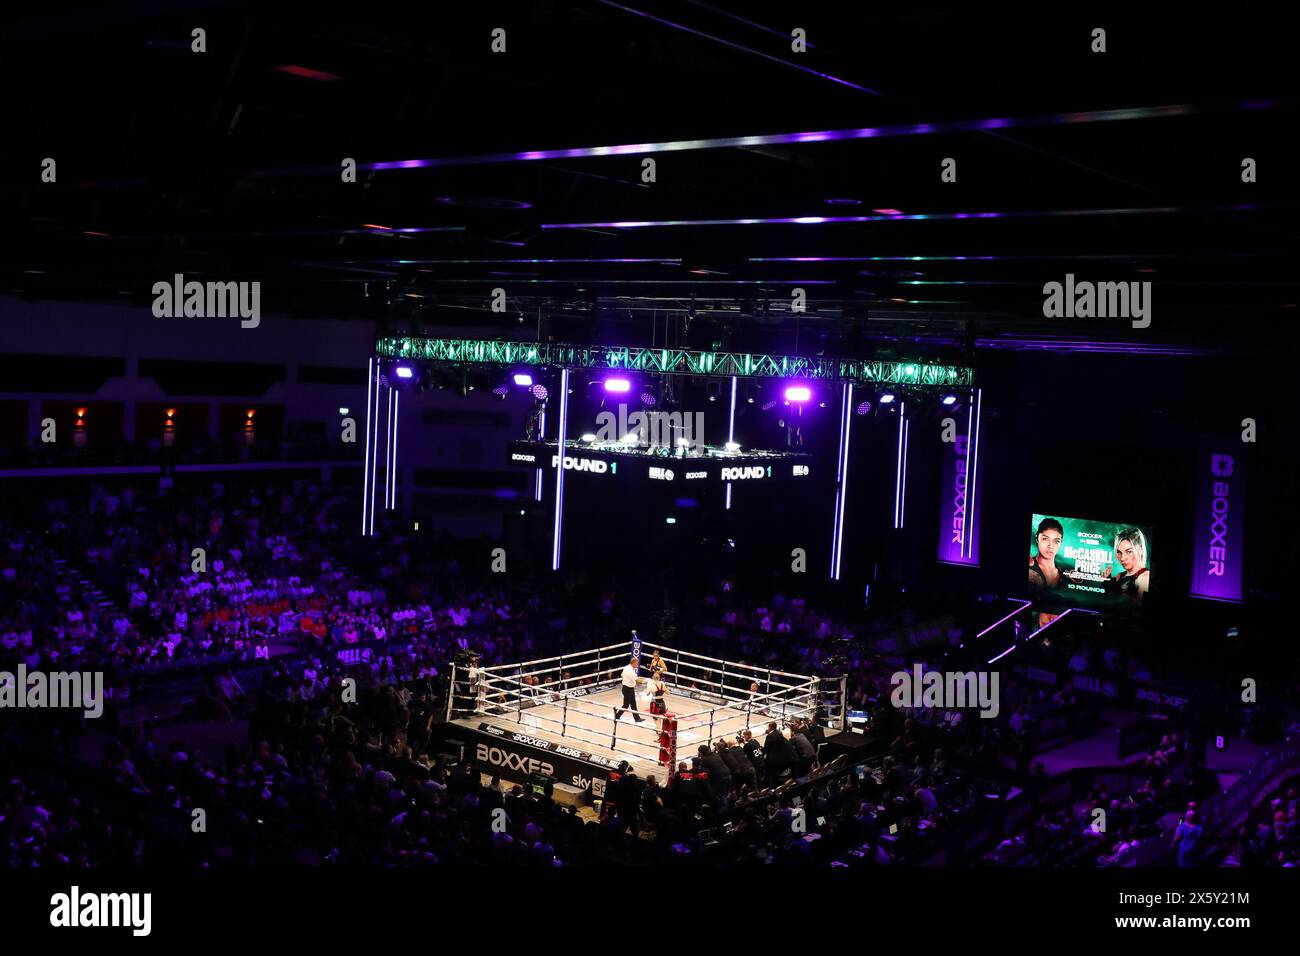 Cardiff, UK. 11th May, 2024. Jessica McCaskill vs Lauren Price at the Utilita Arena in Cardiff, Wales on Saturday 11th May 2024. World championship title fight for WBA, IBO & Ring Magazine World Welterweight Titles. Editorial use only, pic by Andrew Orchard/Andrew Orchard sports photography/Alamy Live news Credit: Andrew Orchard sports photography/Alamy Live News Stock Photo